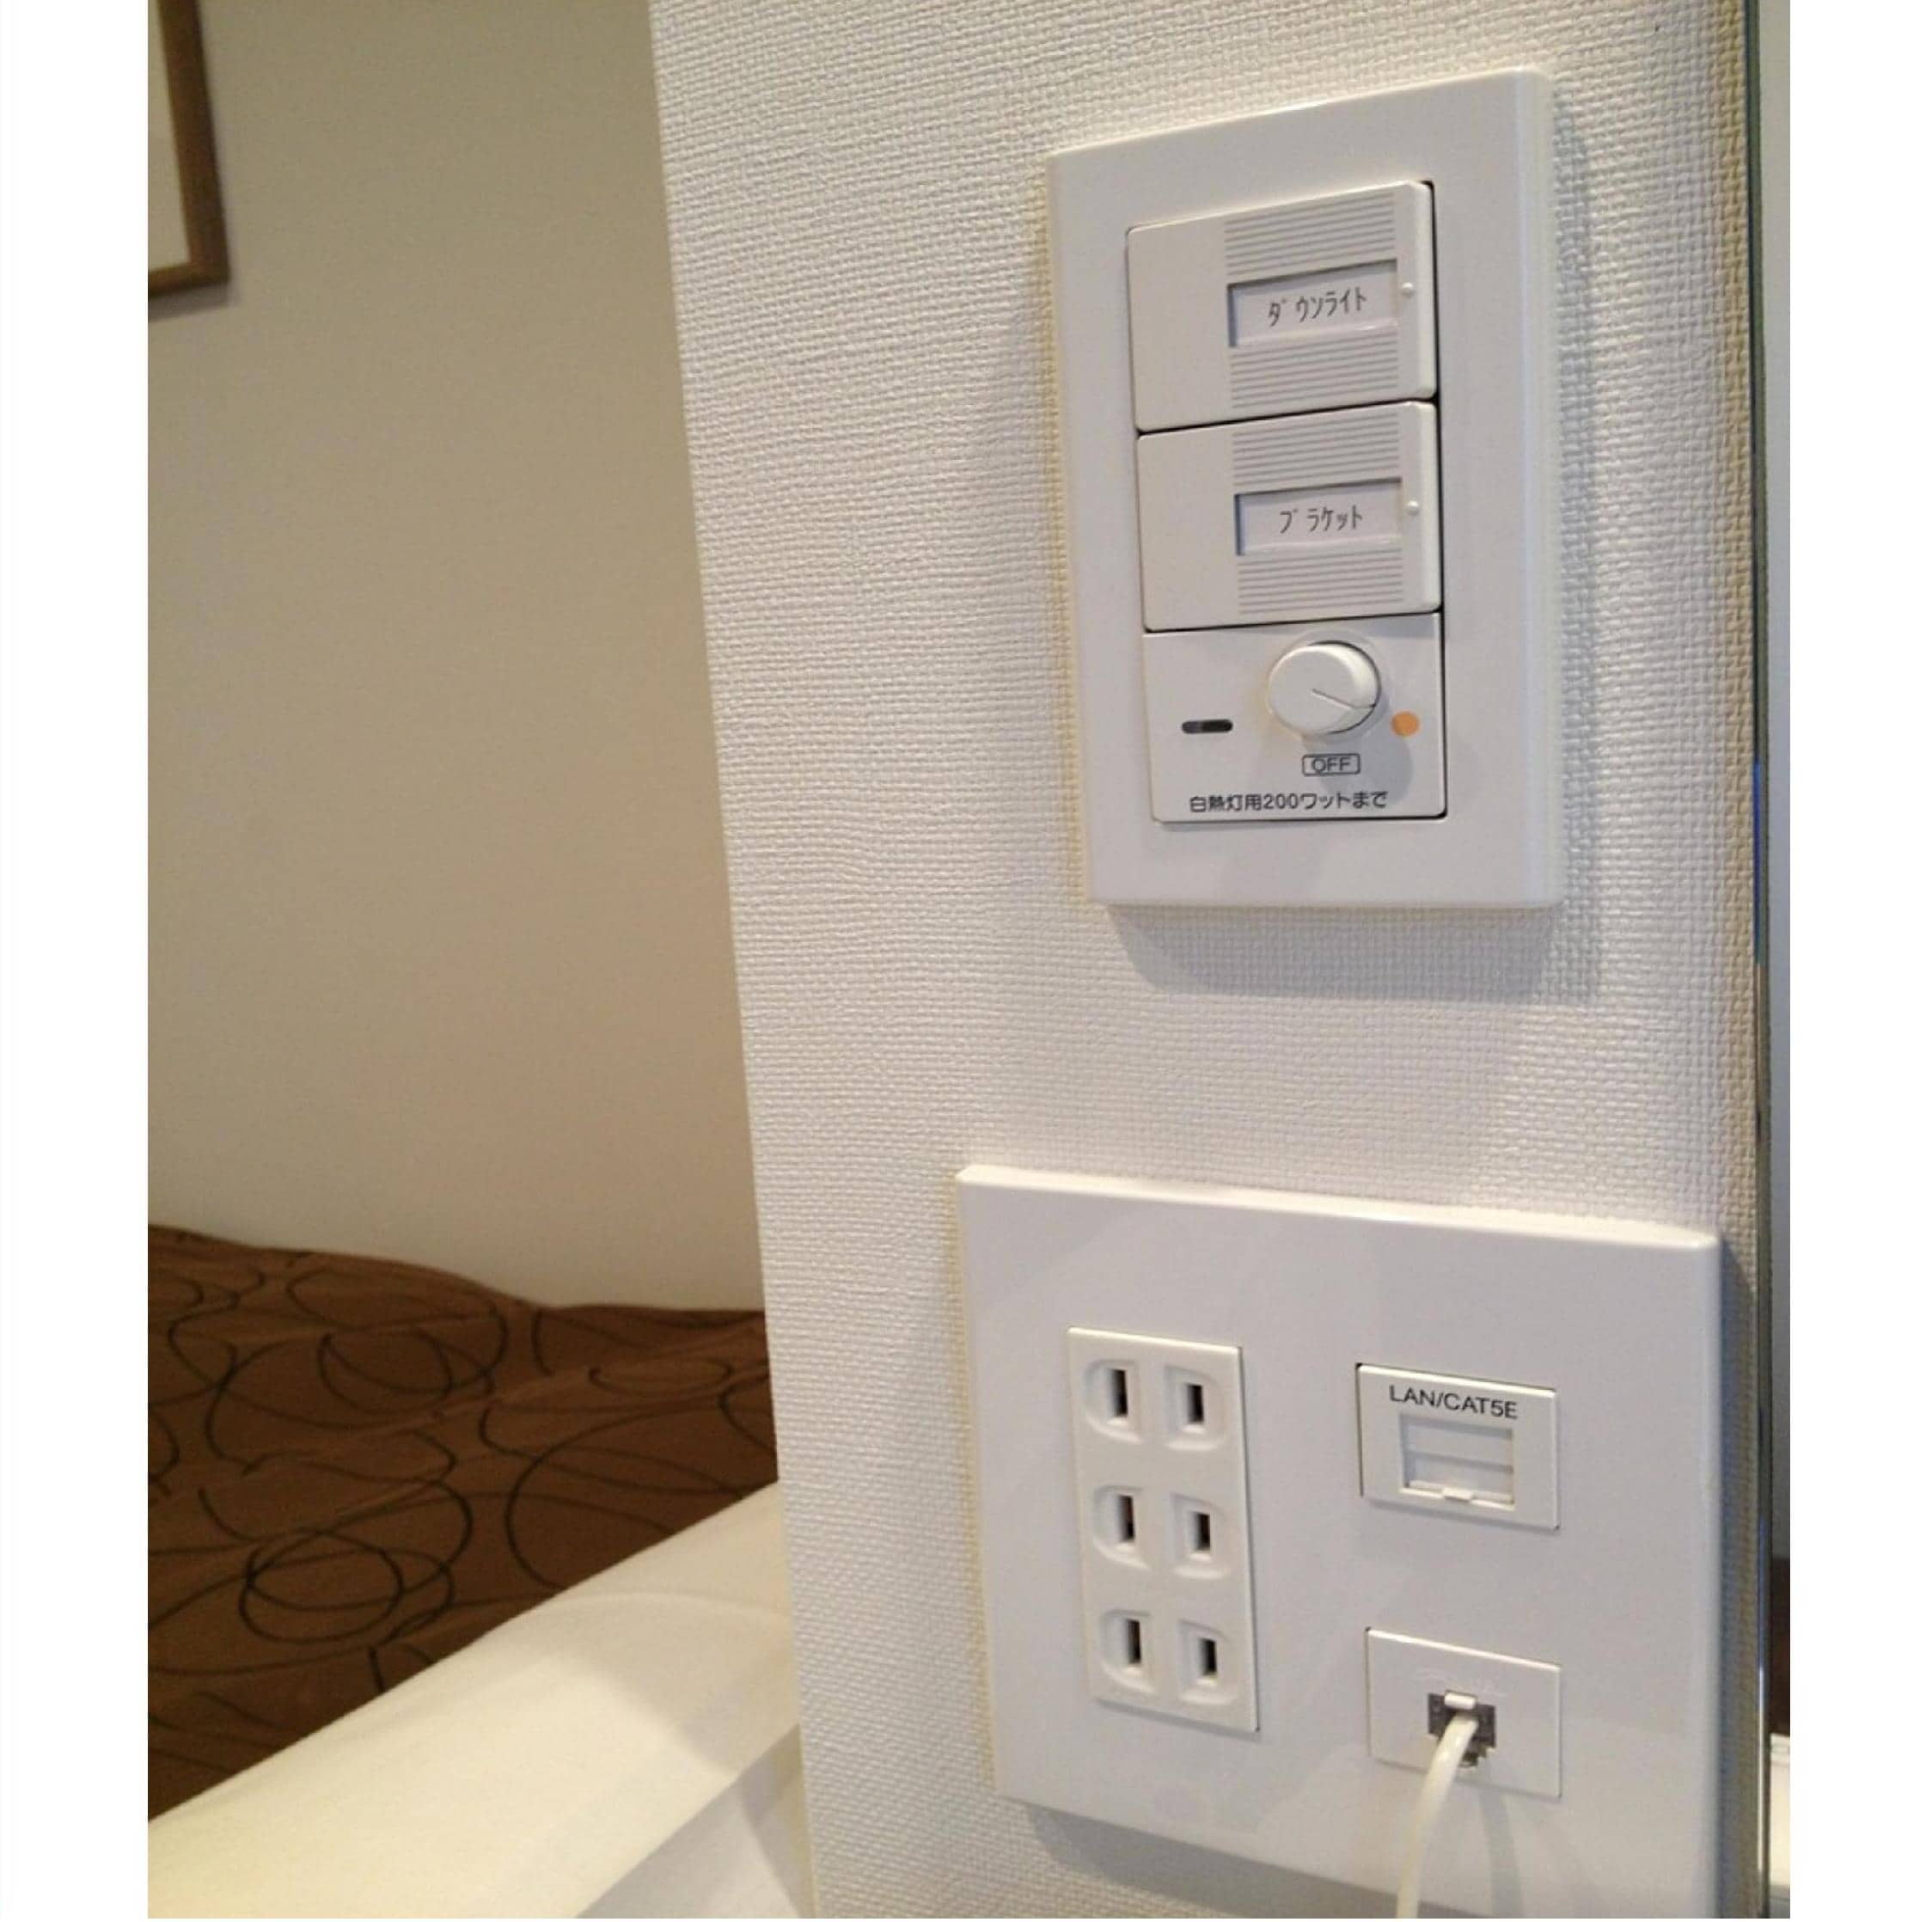 Outlet switch